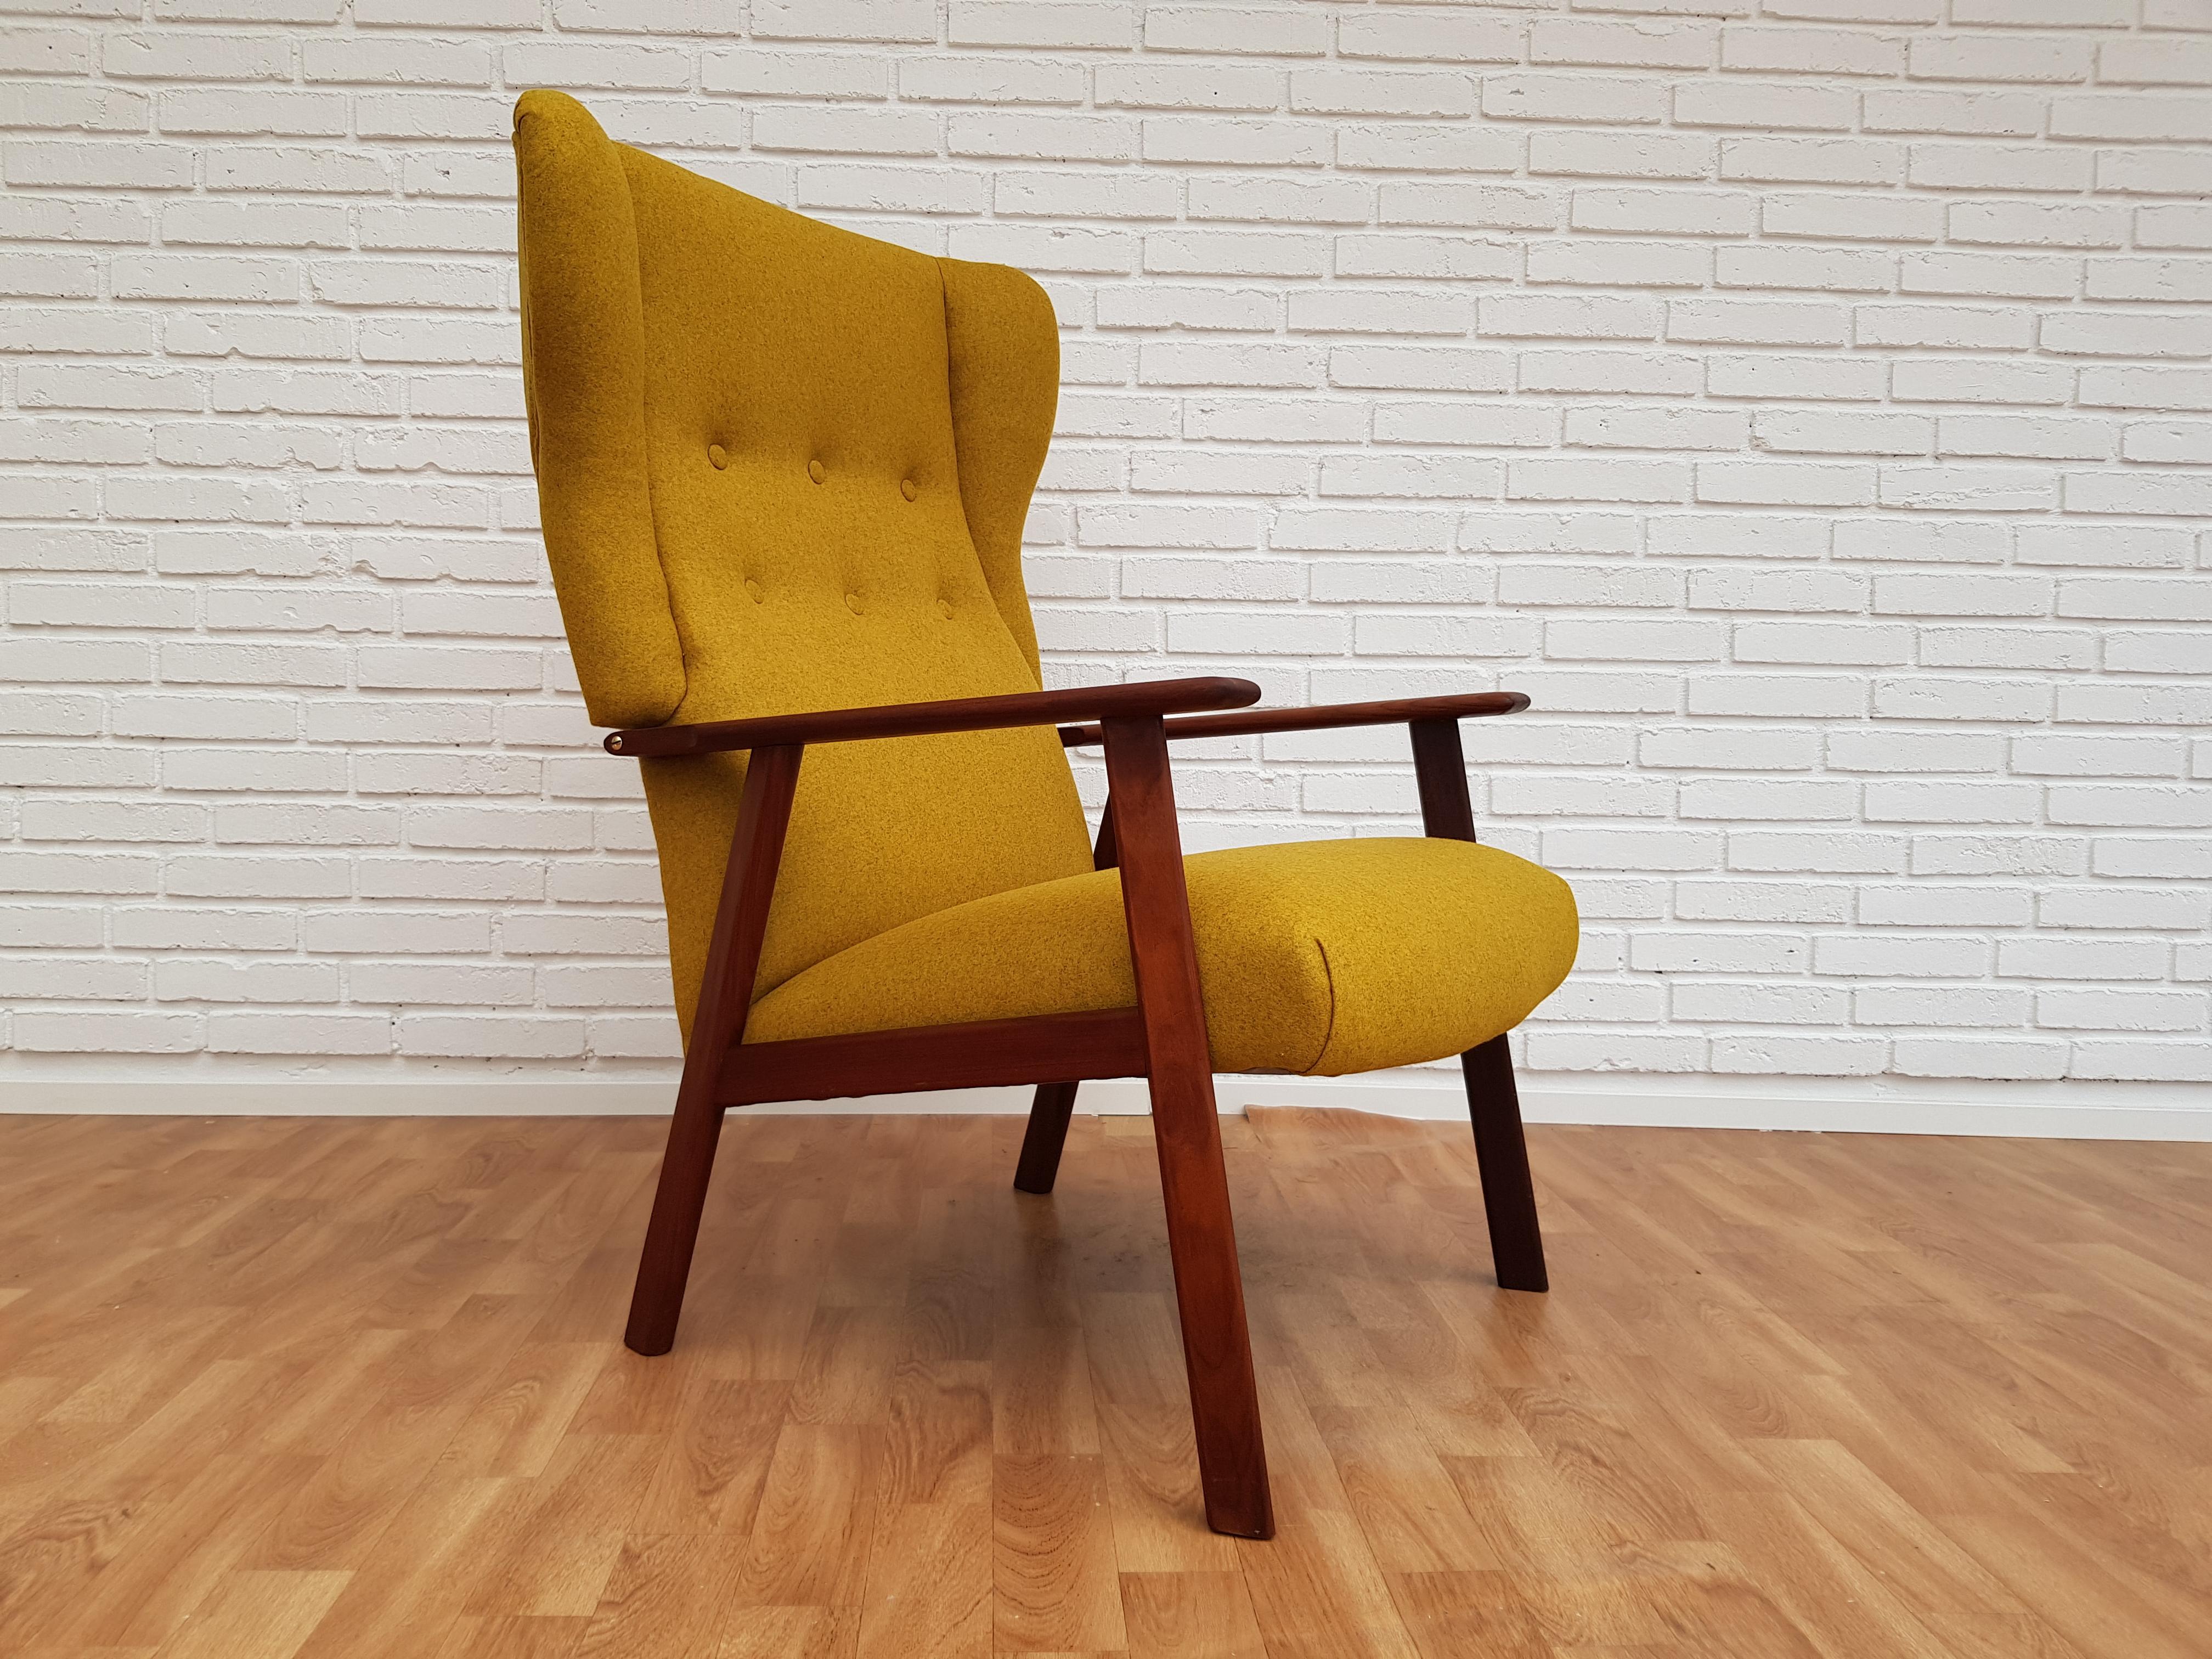 Danish designed high-back armchair with footstool. Produced in about 1970 by the Danish furniture manufacturer. Solid teak wood. Completely renovated by craftsman, furniture upholsterer at Retro Møbler Galleri. Brand new padding with natural coconut